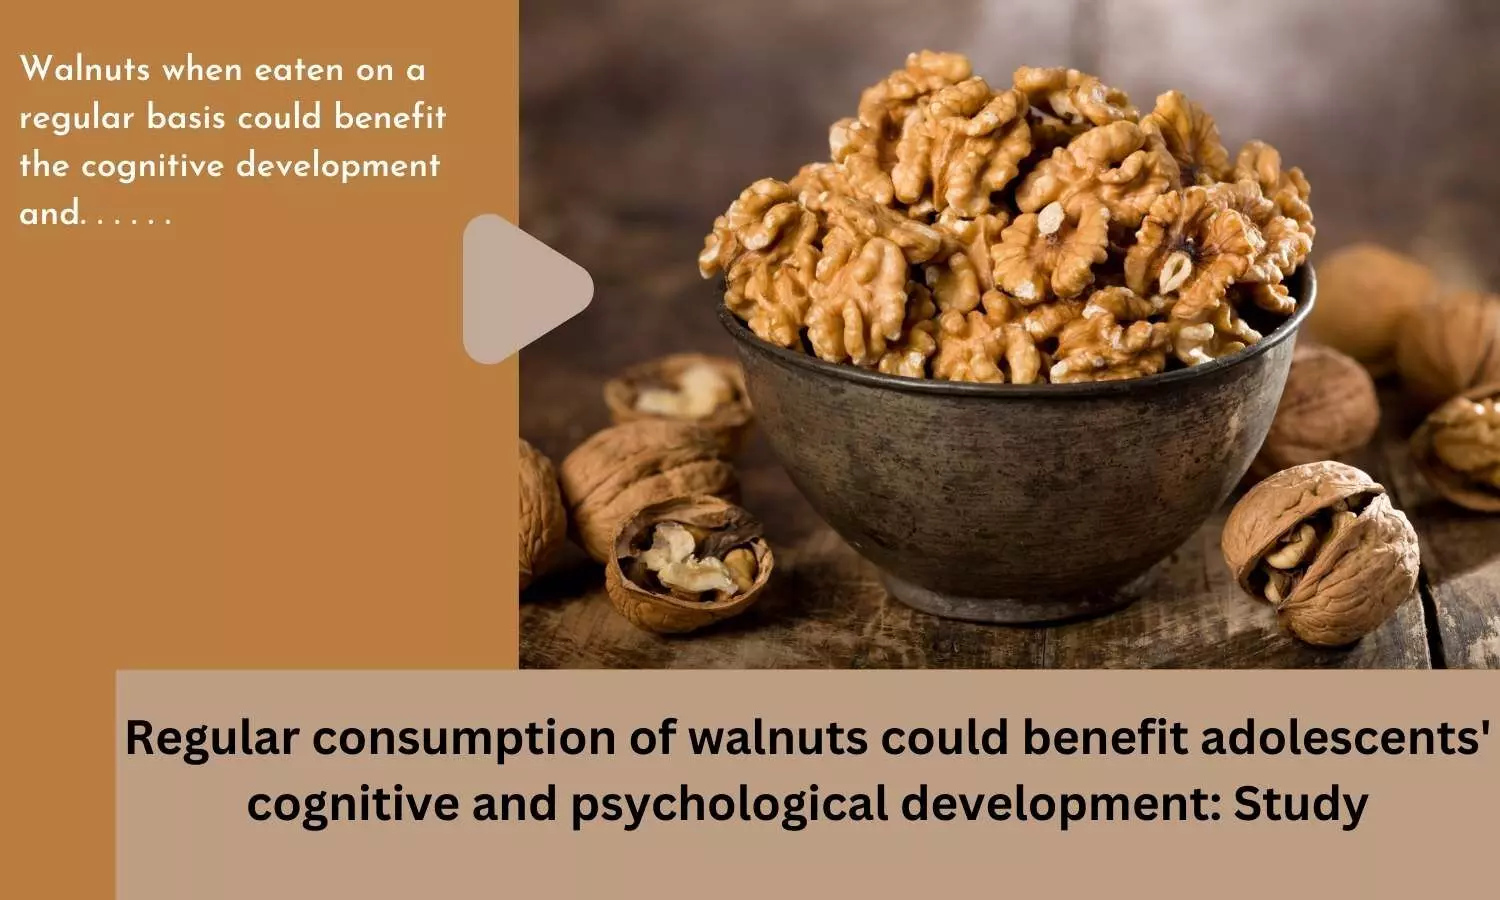 Regular consumption of walnuts could benefit adolescents cognitive and psychological development: Study